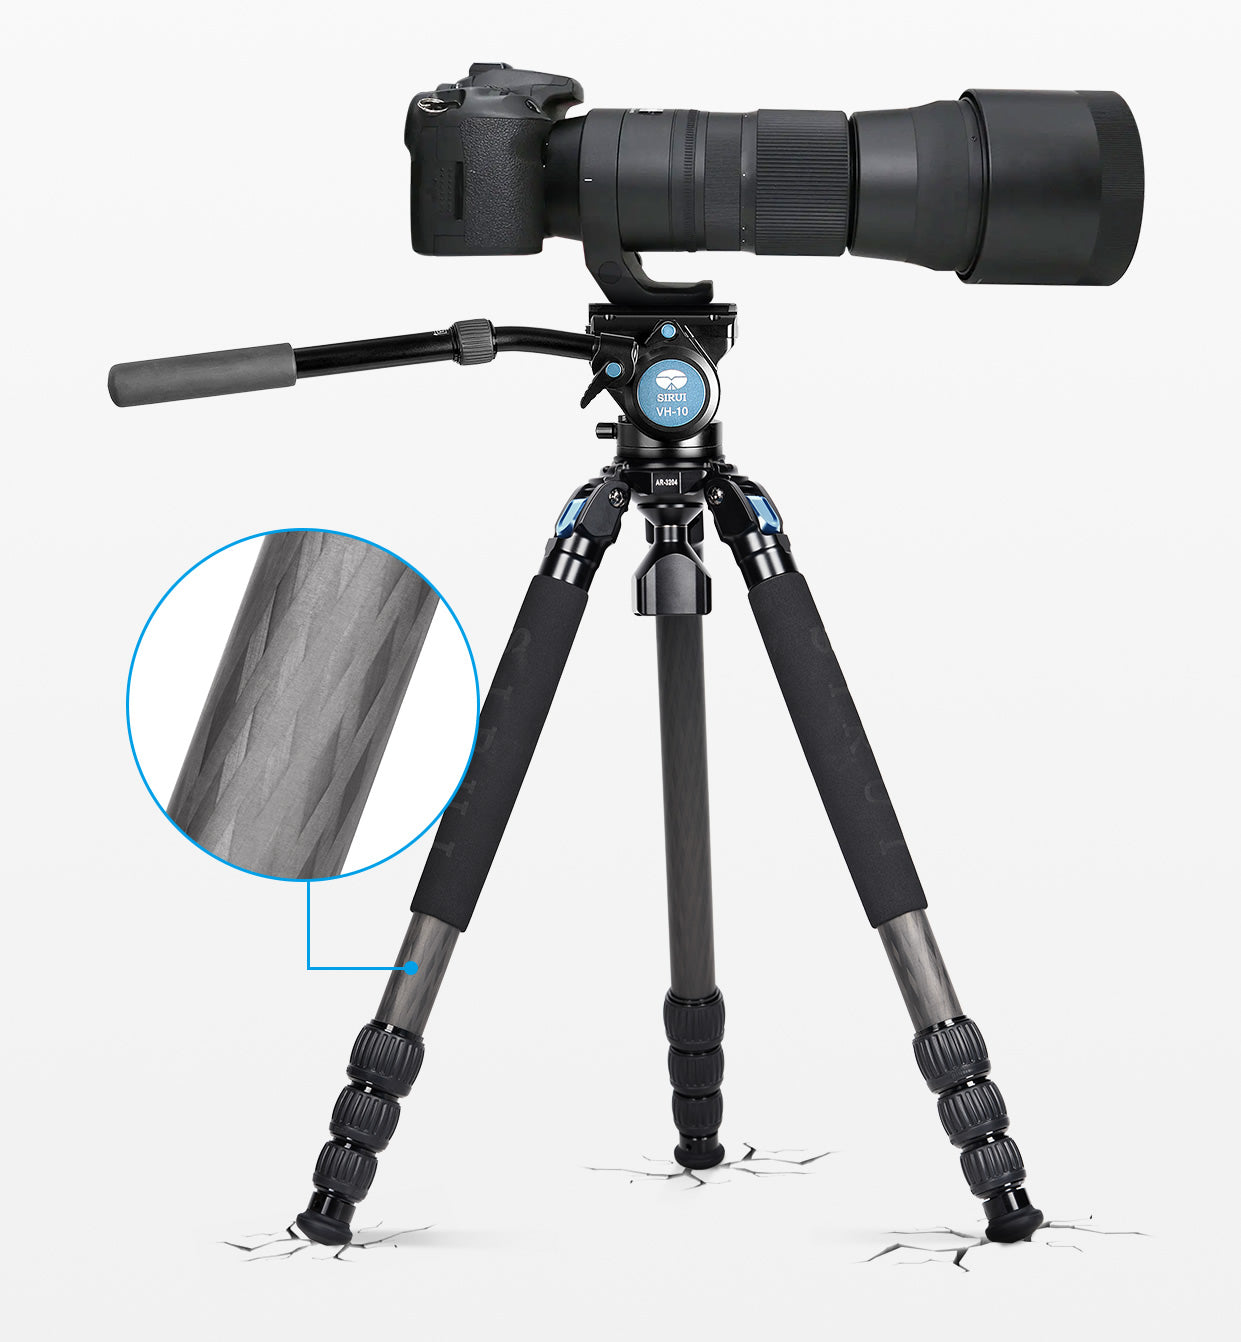 The tripod can safely support cameras up to 25kg/55.1lb.